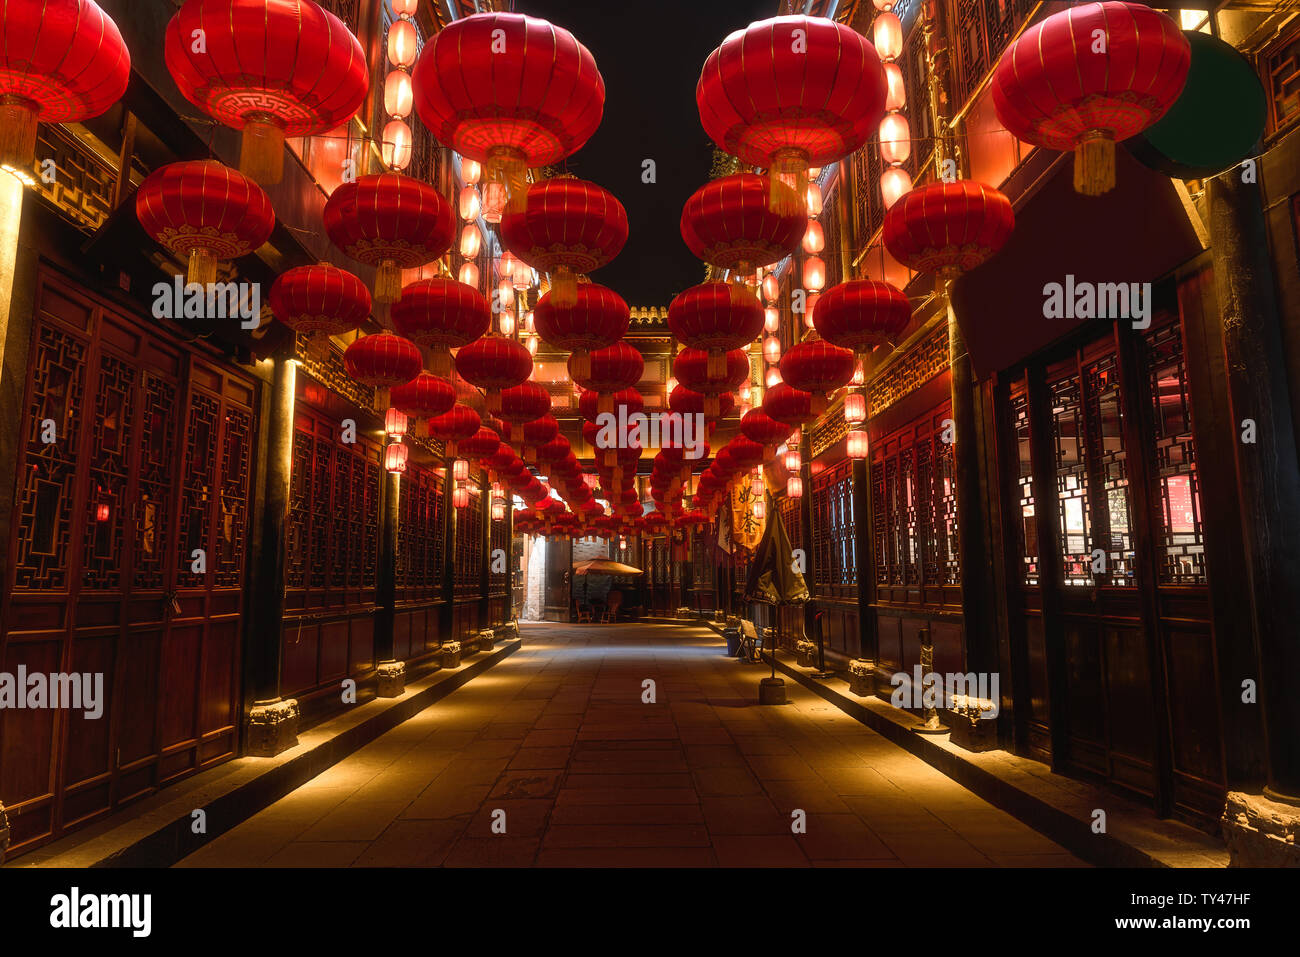 The traditional red Chinese lanterns in JInli,Chengdu,China during Chinese Lunar New Year.The Chinese characters on the inscription mean'snacks' and t Stock Photo